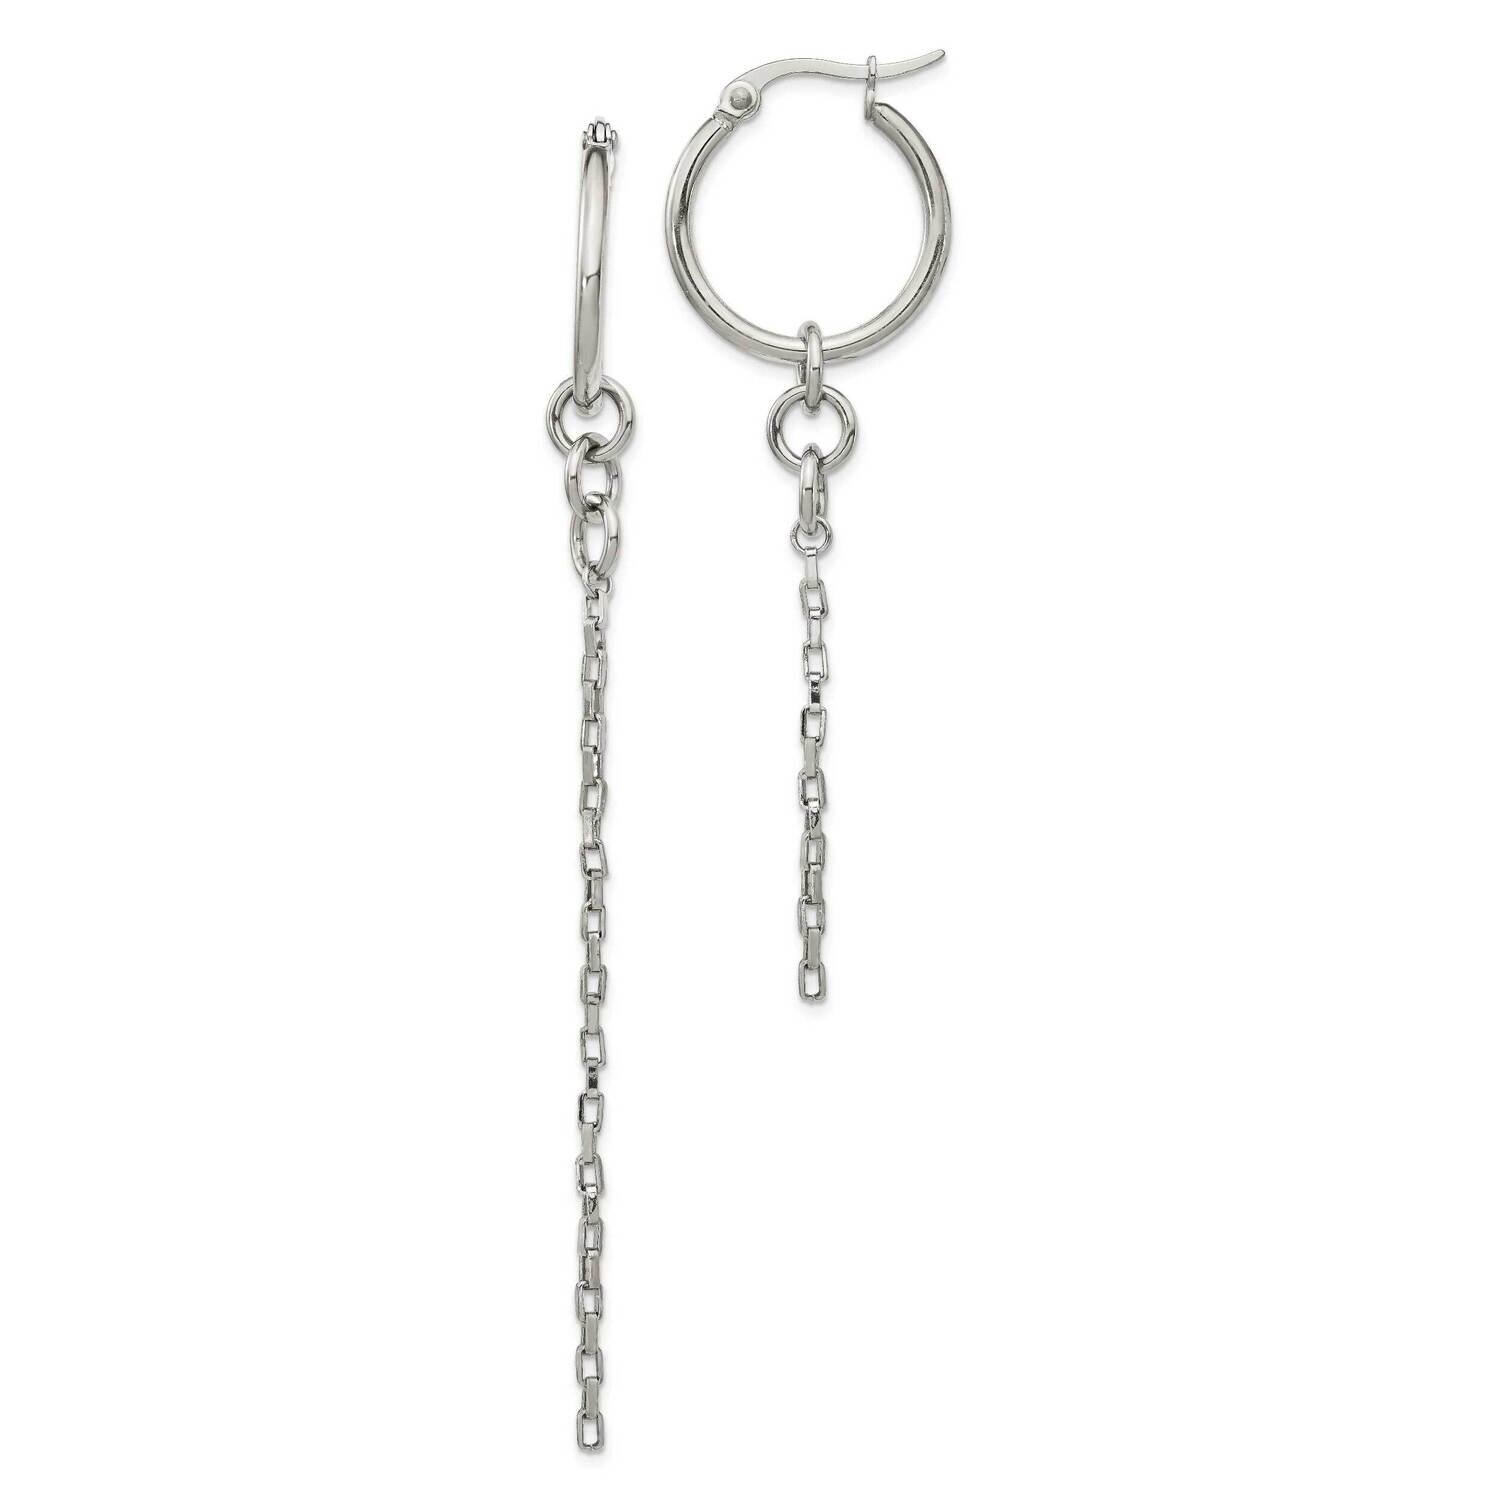 Long and Short Chain Dangle Hoop Earrings Stainless Steel Polished SRE1378